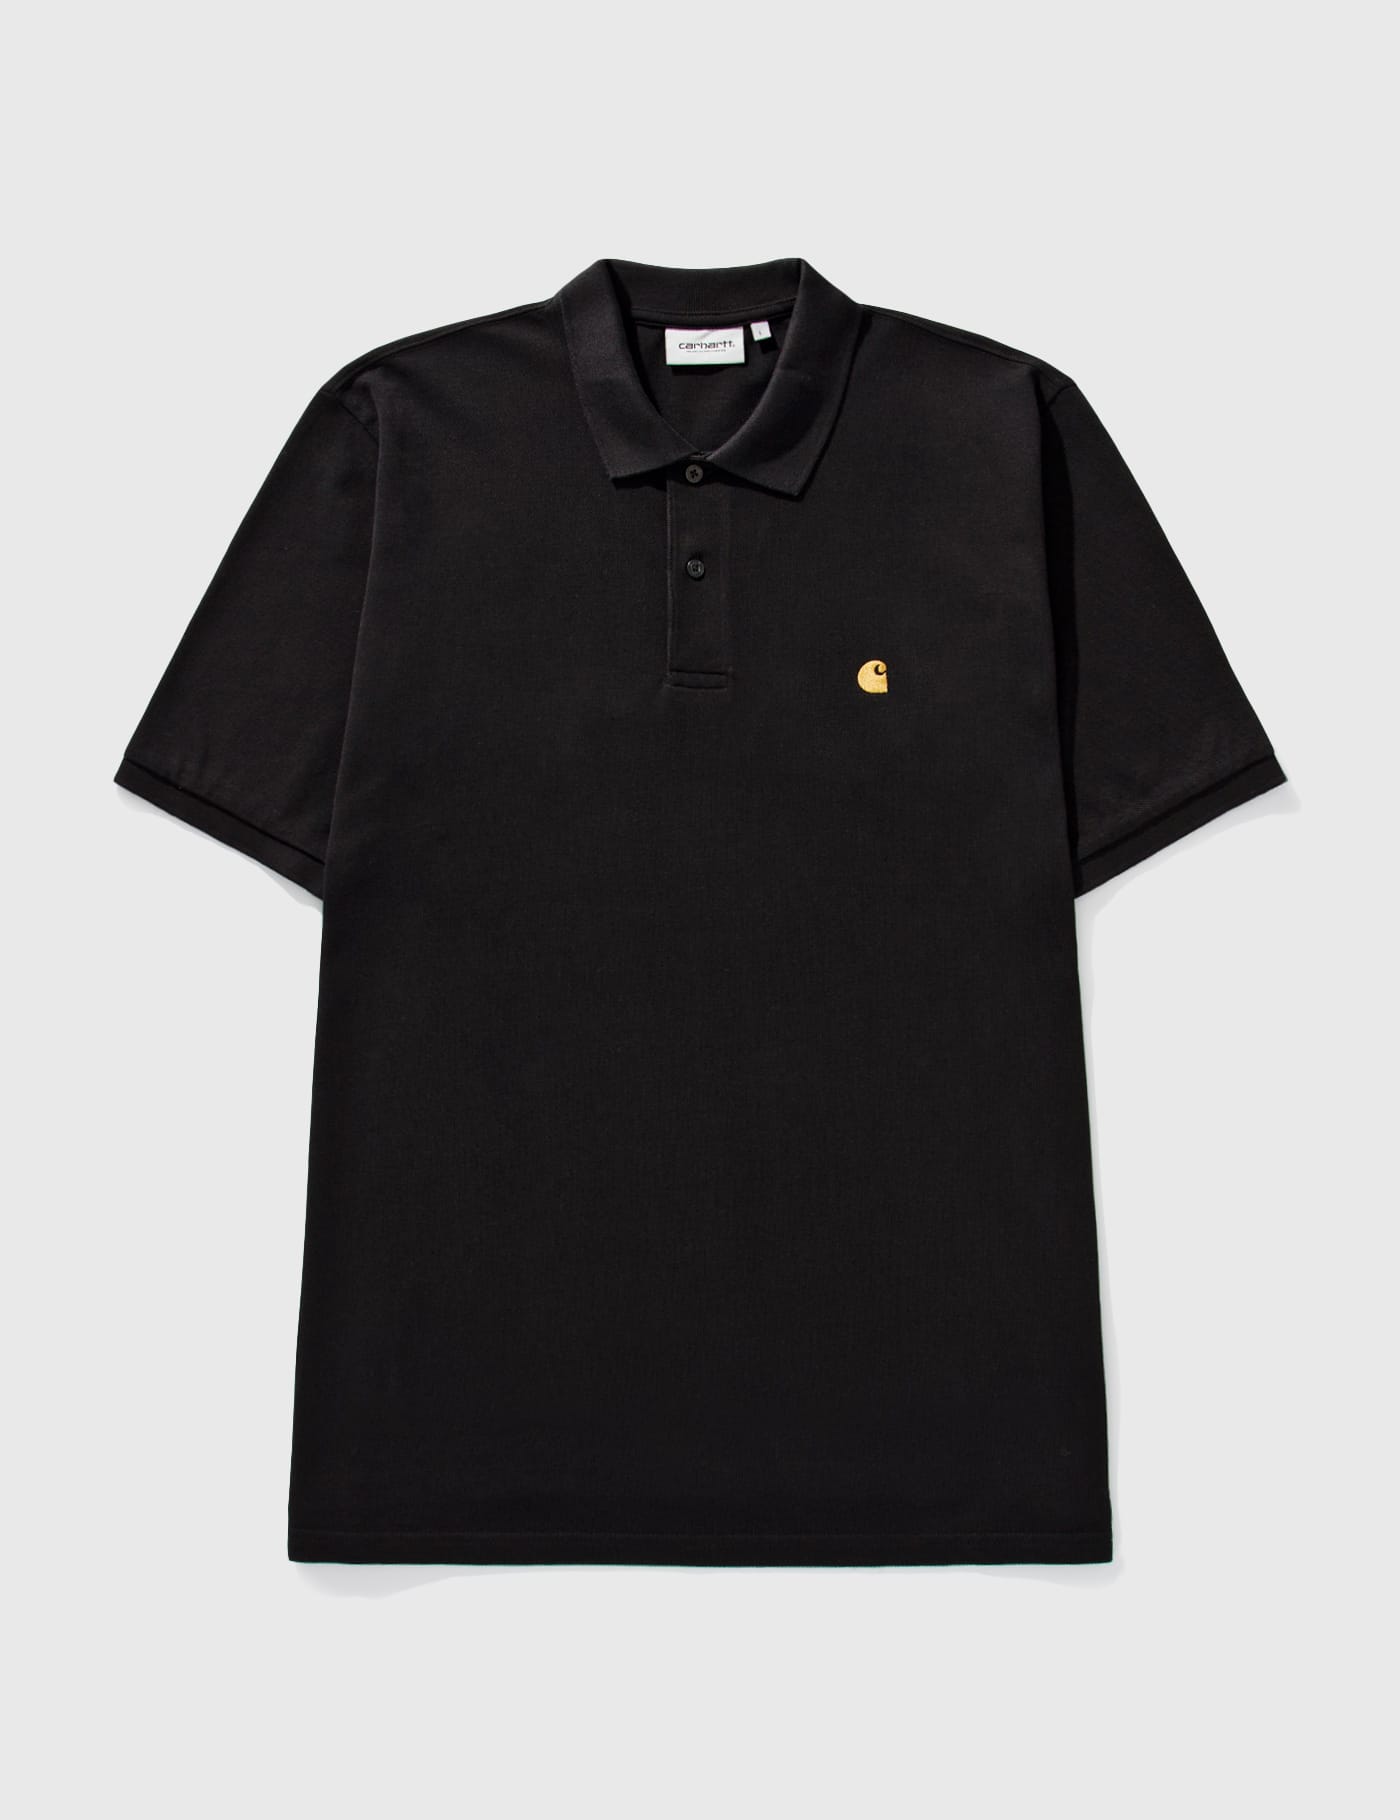 Thisisneverthat - Chain Zip-Up Polo | HBX - Globally Curated ...